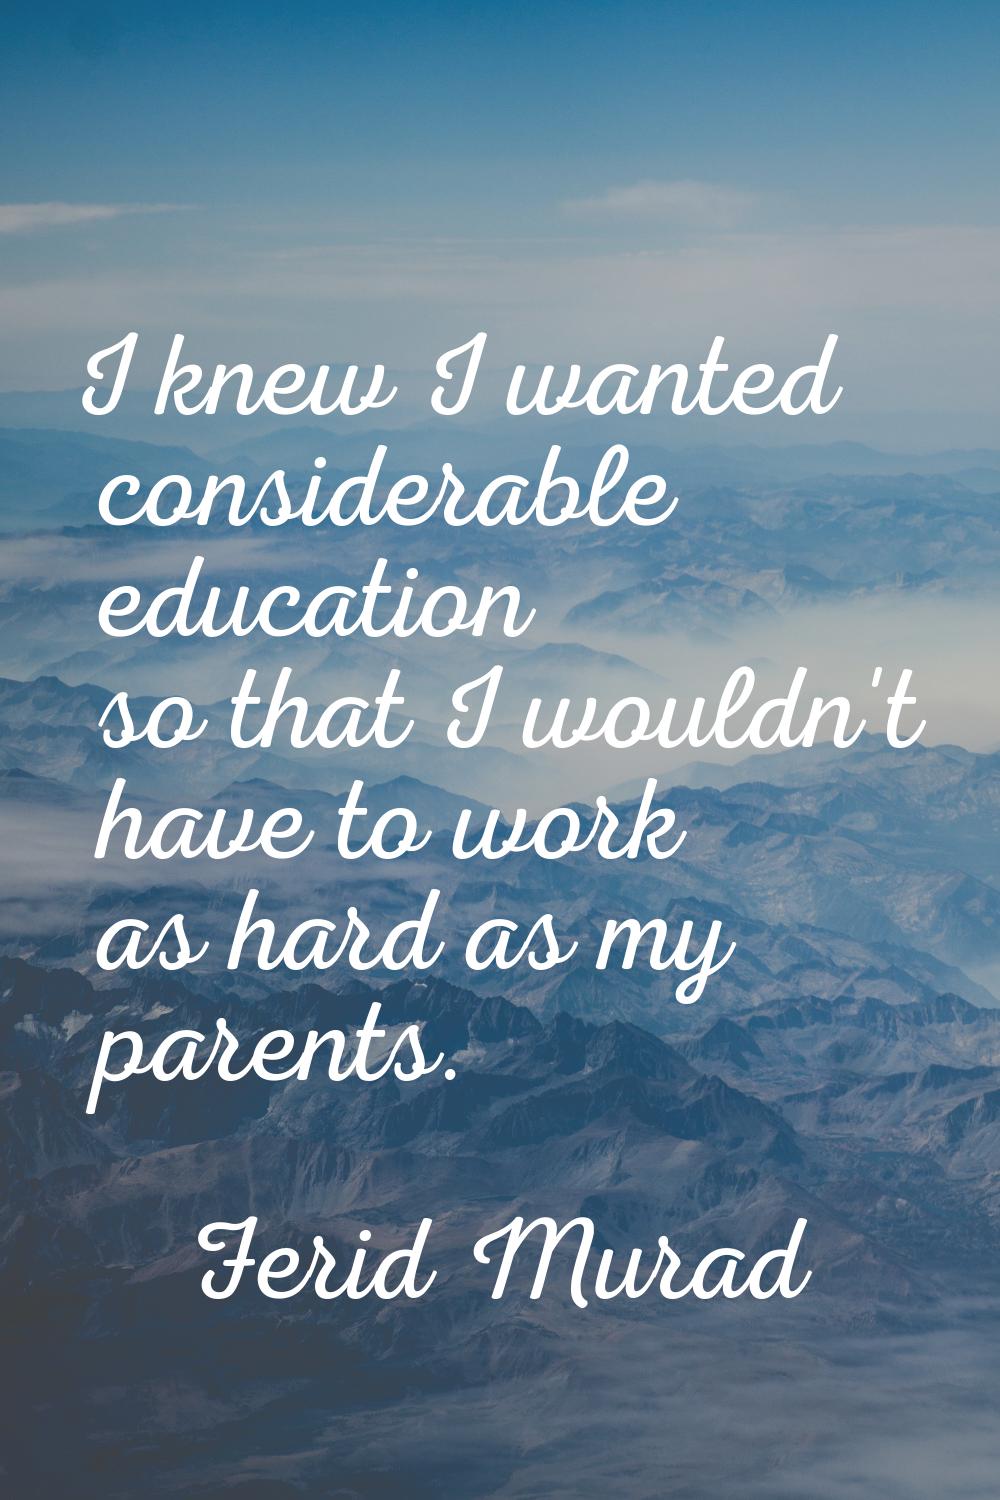 I knew I wanted considerable education so that I wouldn't have to work as hard as my parents.